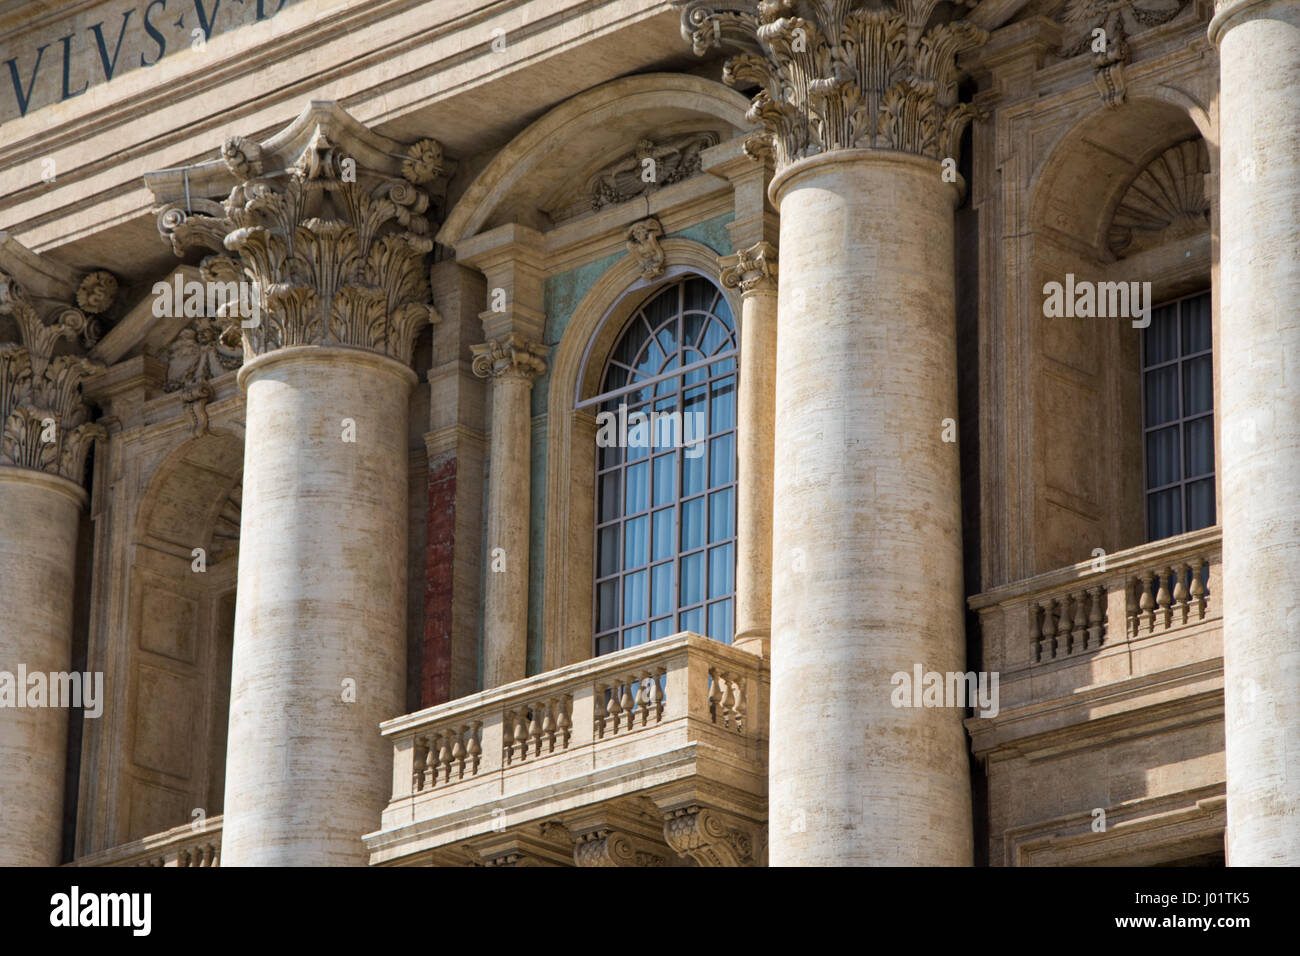 Rome, Italy - March 21, 2017: Pope balcony and window at Saint Peters Cathedral in Vatican Stock Photo